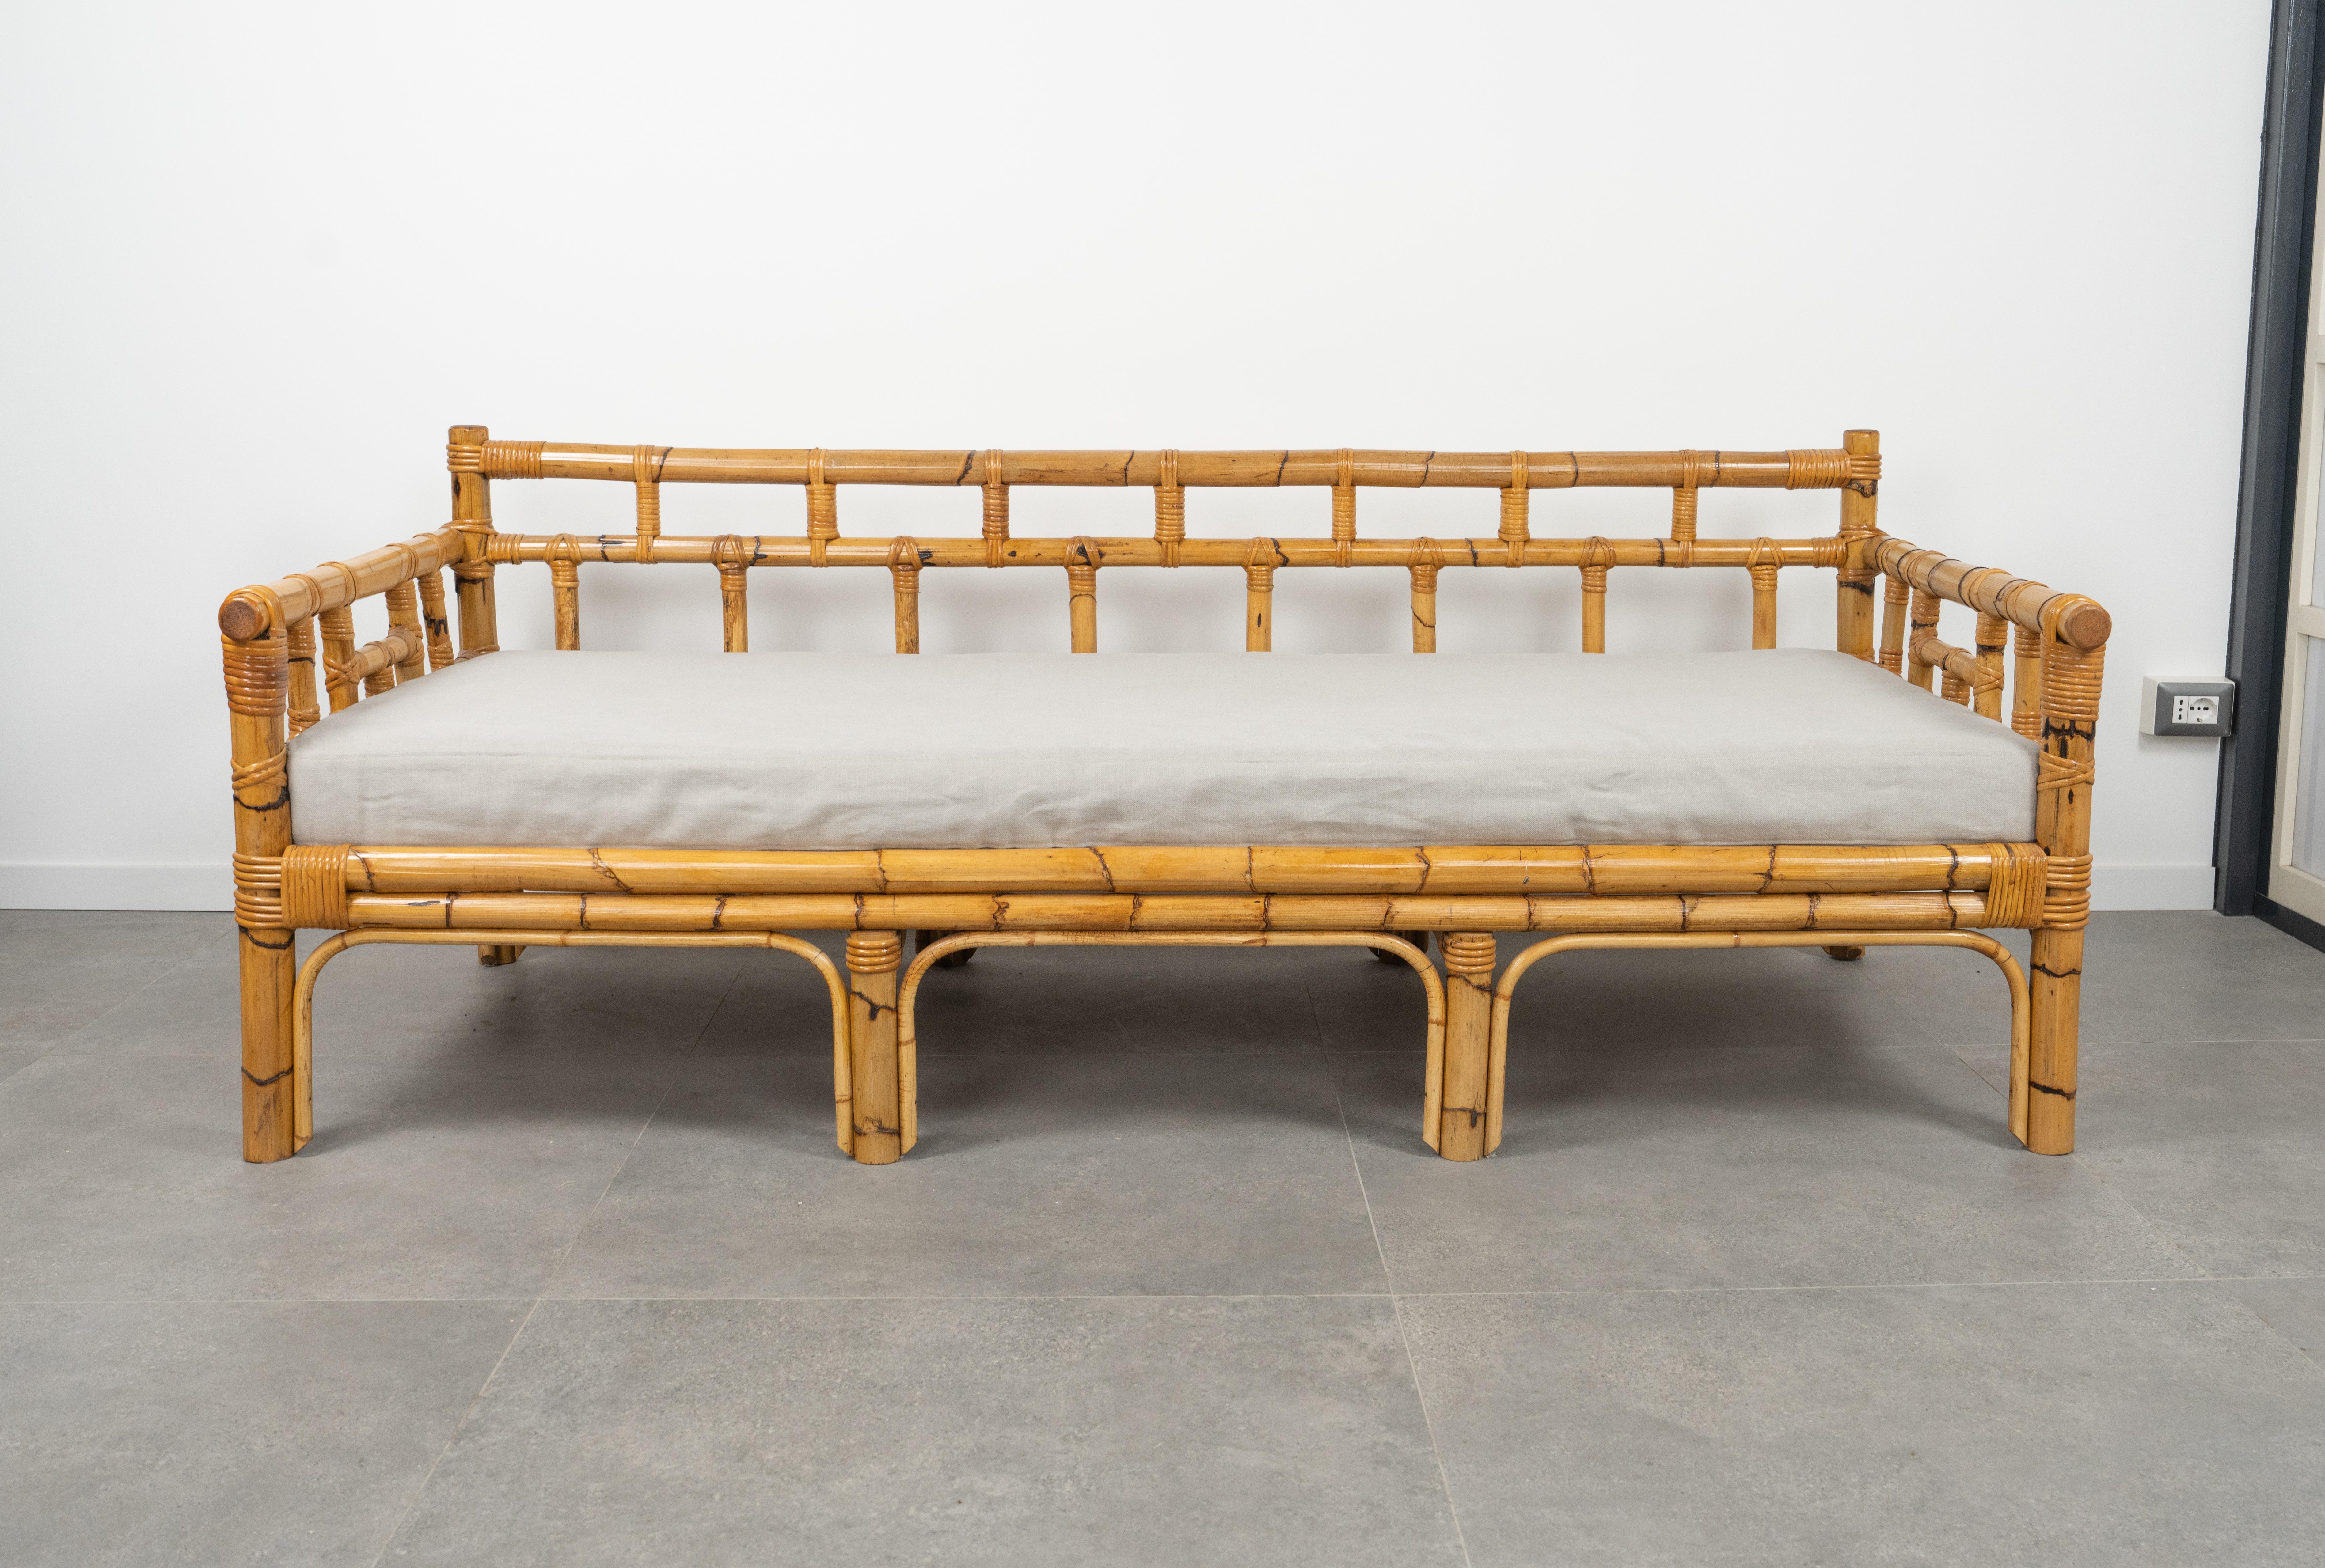 Midcentury Bamboo and Rattan Three-Seat Sofa by Vivai Del Sud, Italy 1970s For Sale 12